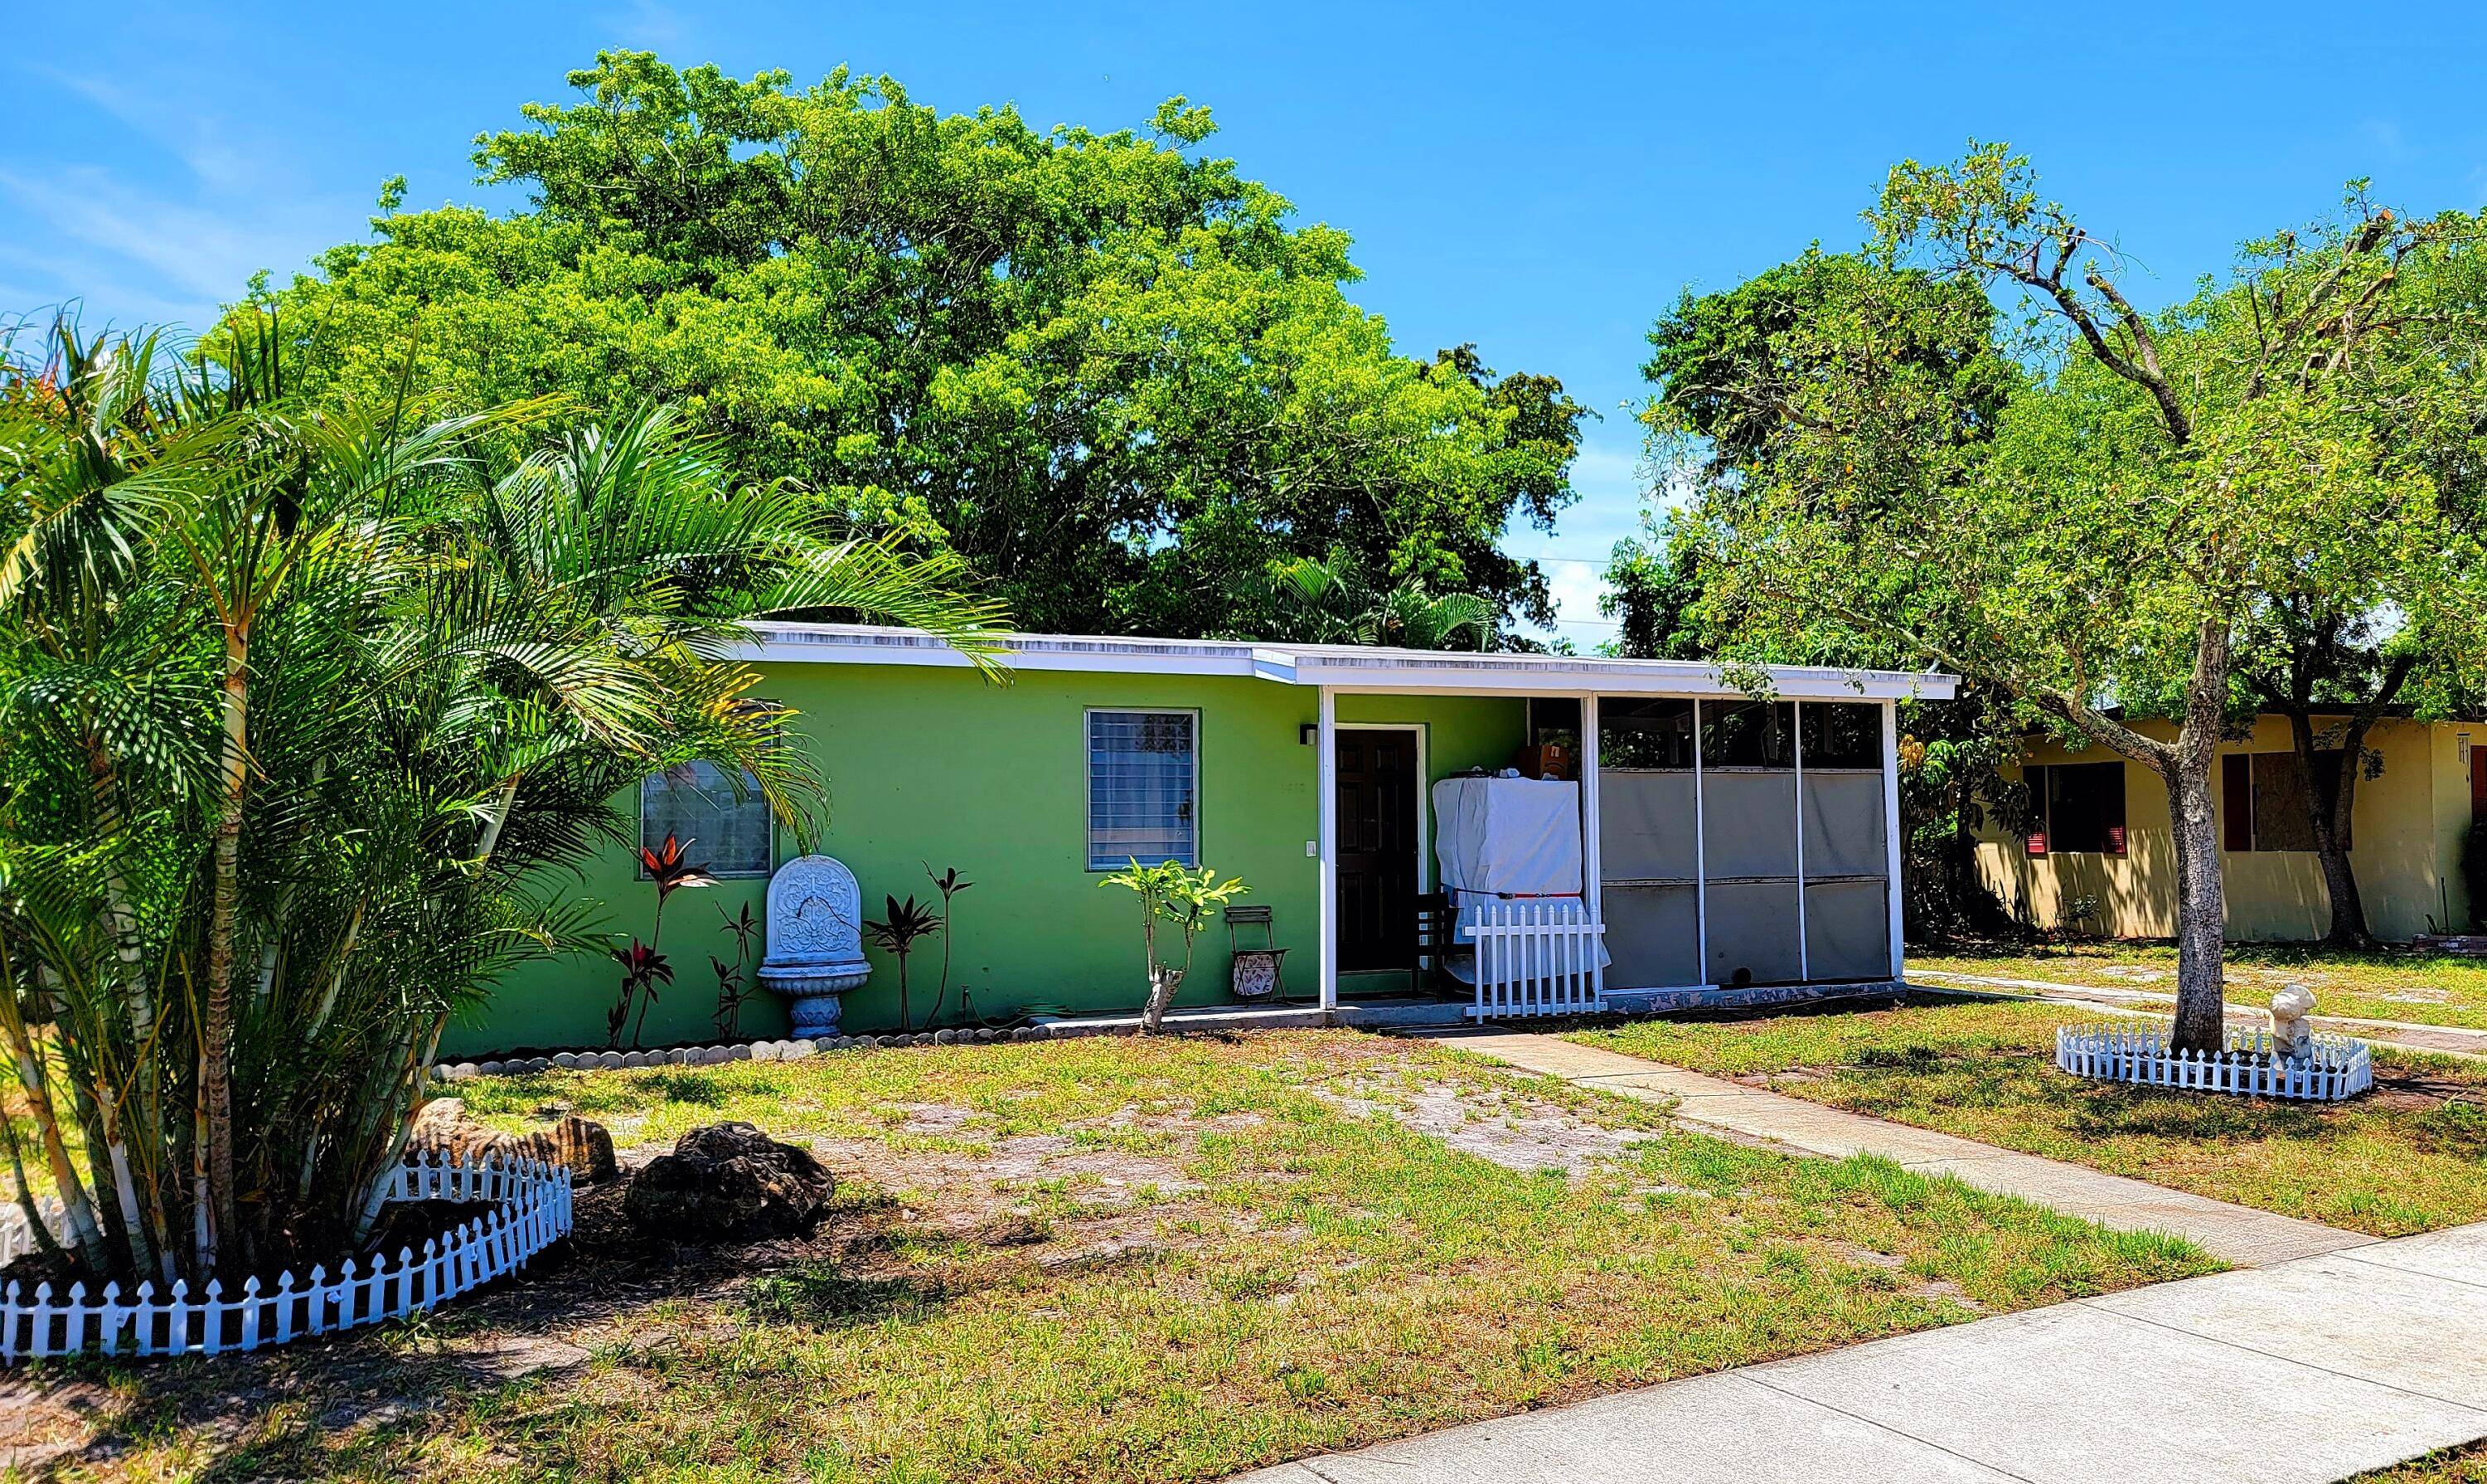 Spacious two bedroom, one bathroom home in Pompano Beach.